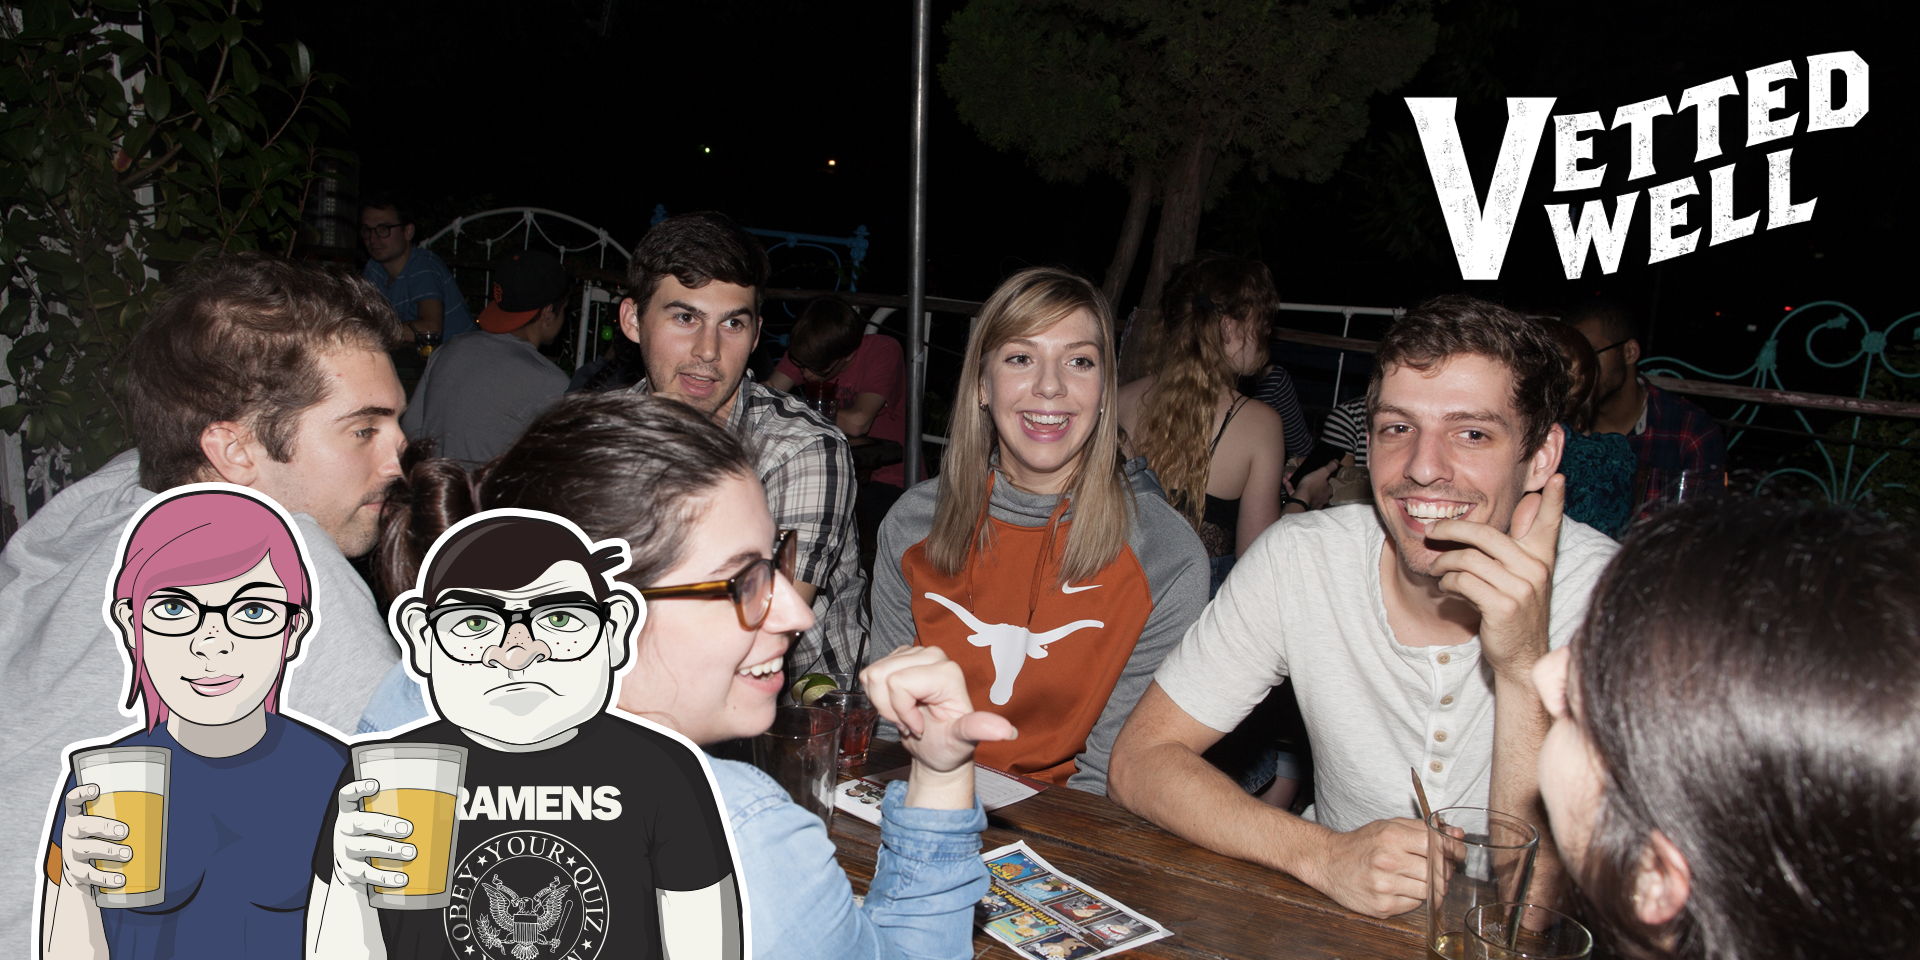 Geeks Who Drink Trivia Night at Vetted Well at Alamo Drafthouse Dallas promotional image